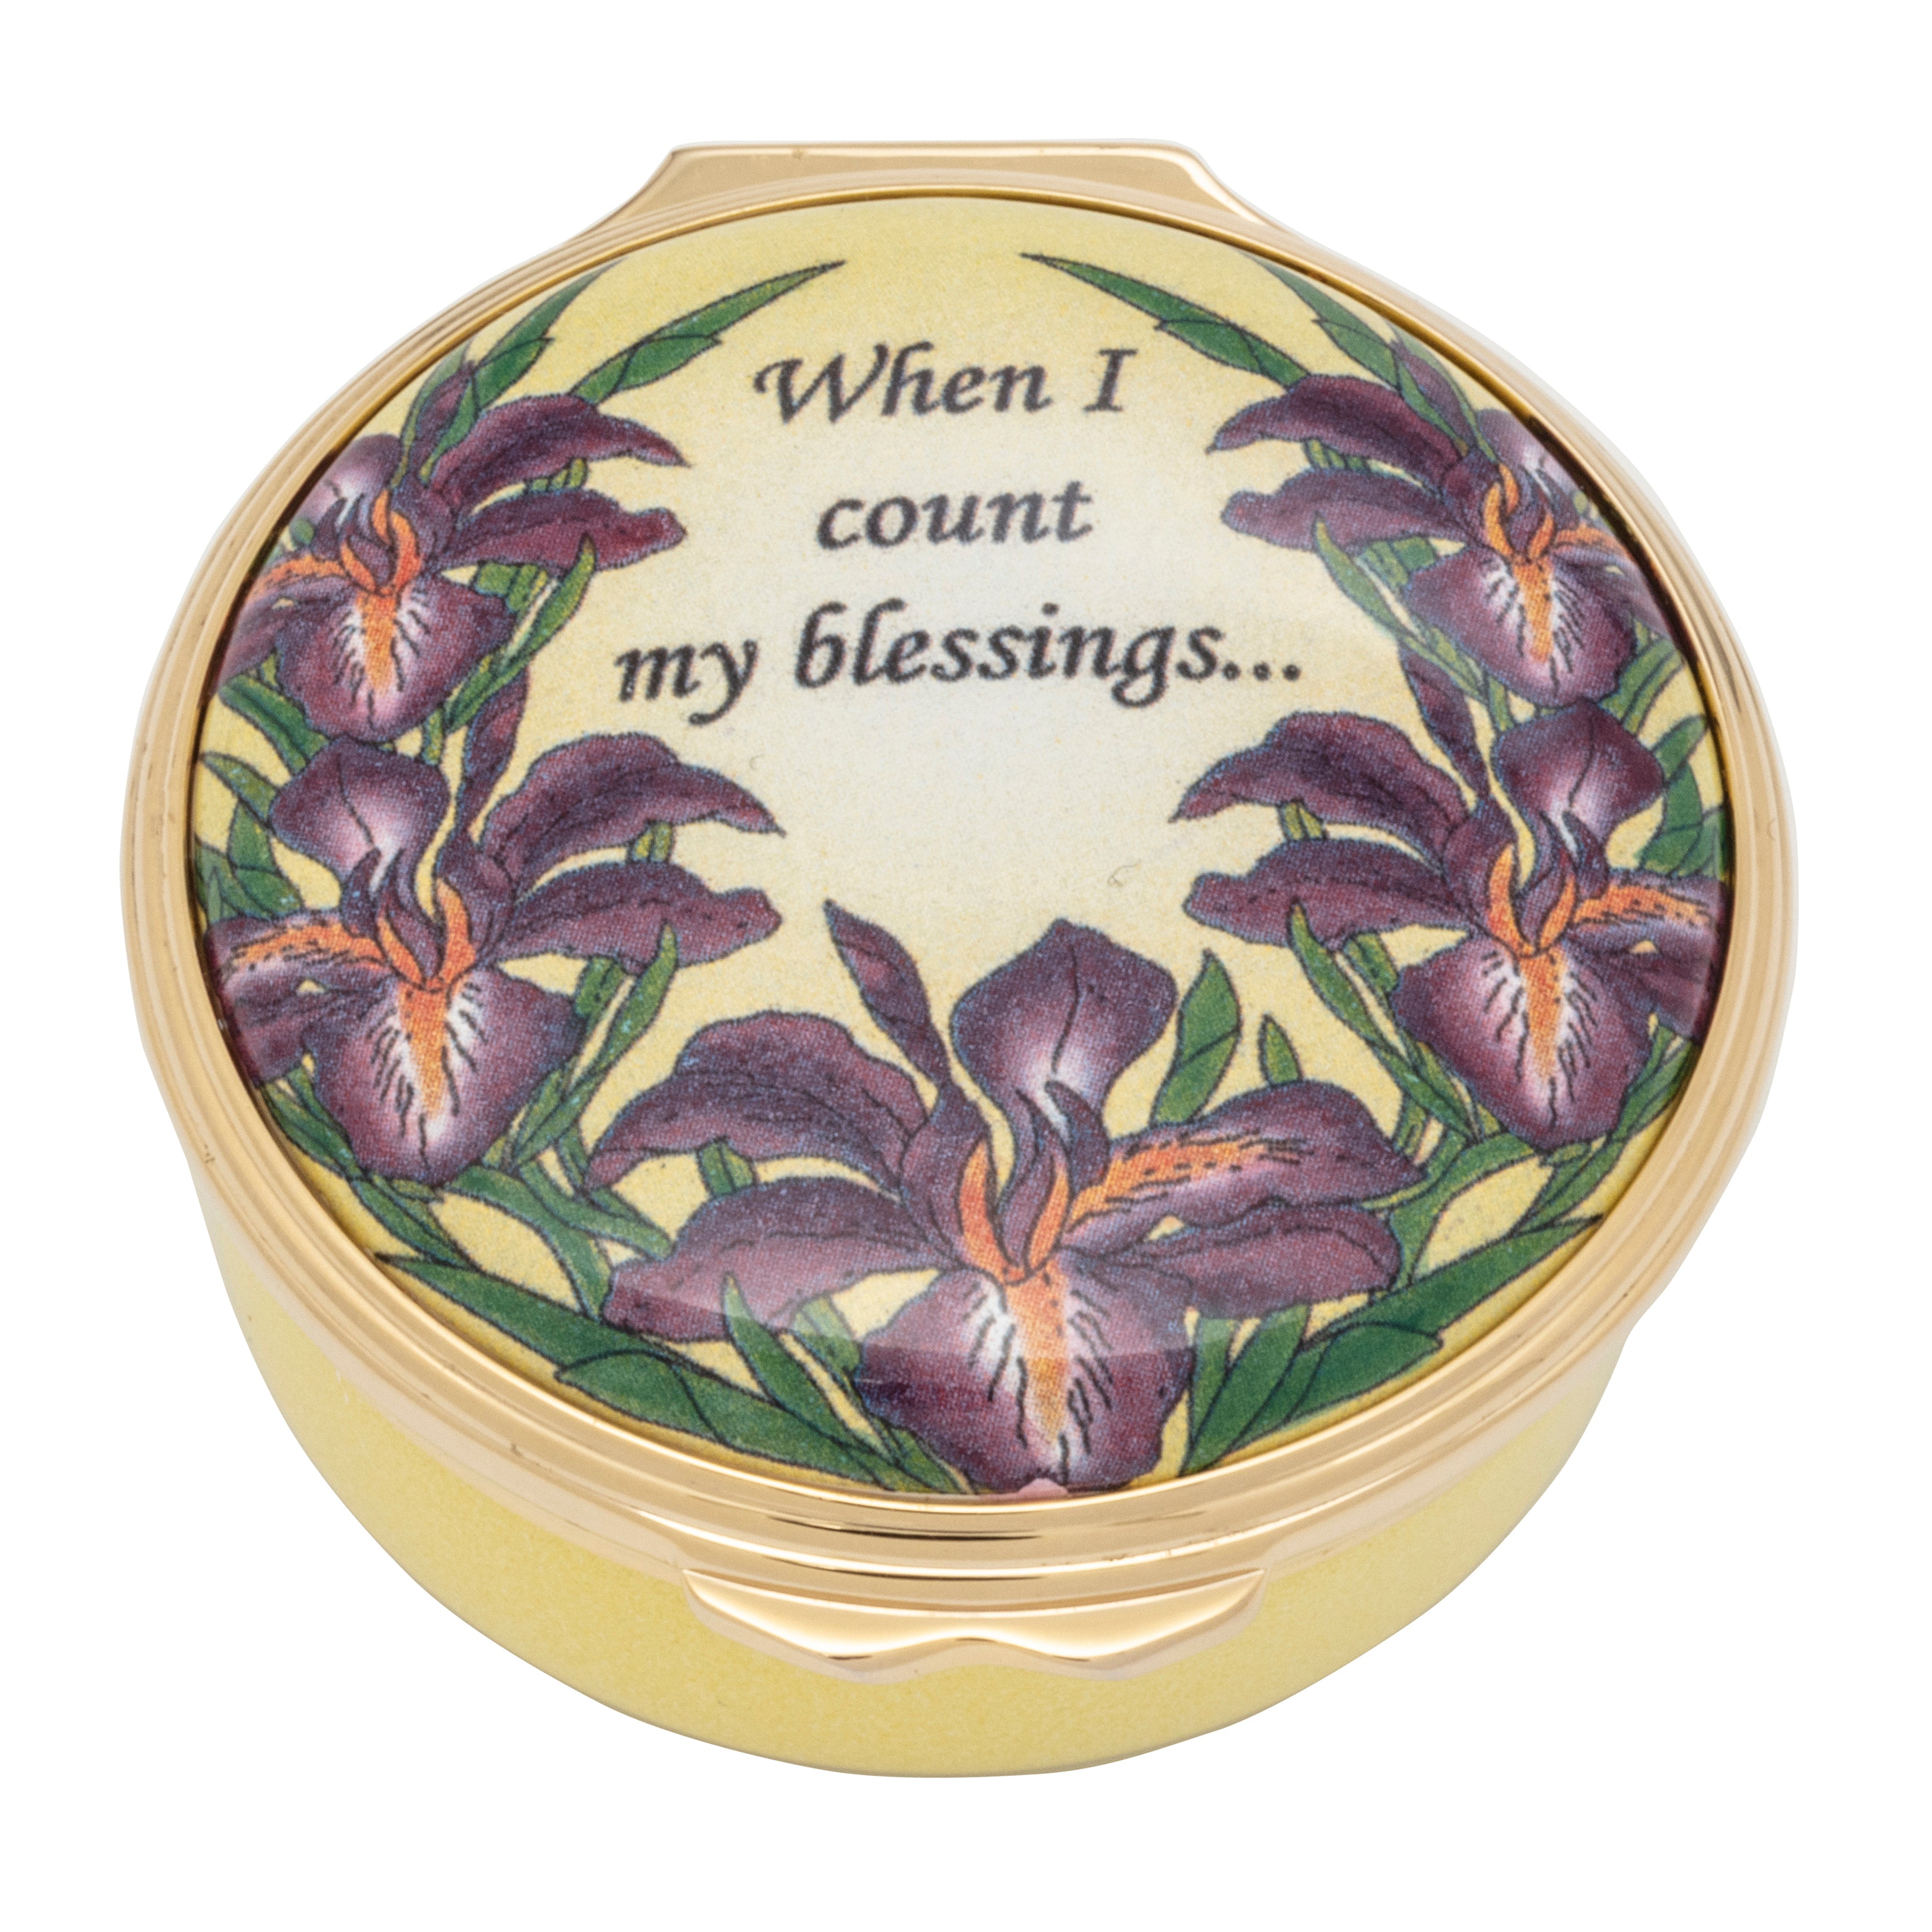 "When I Count My Blessings" Enamel Box